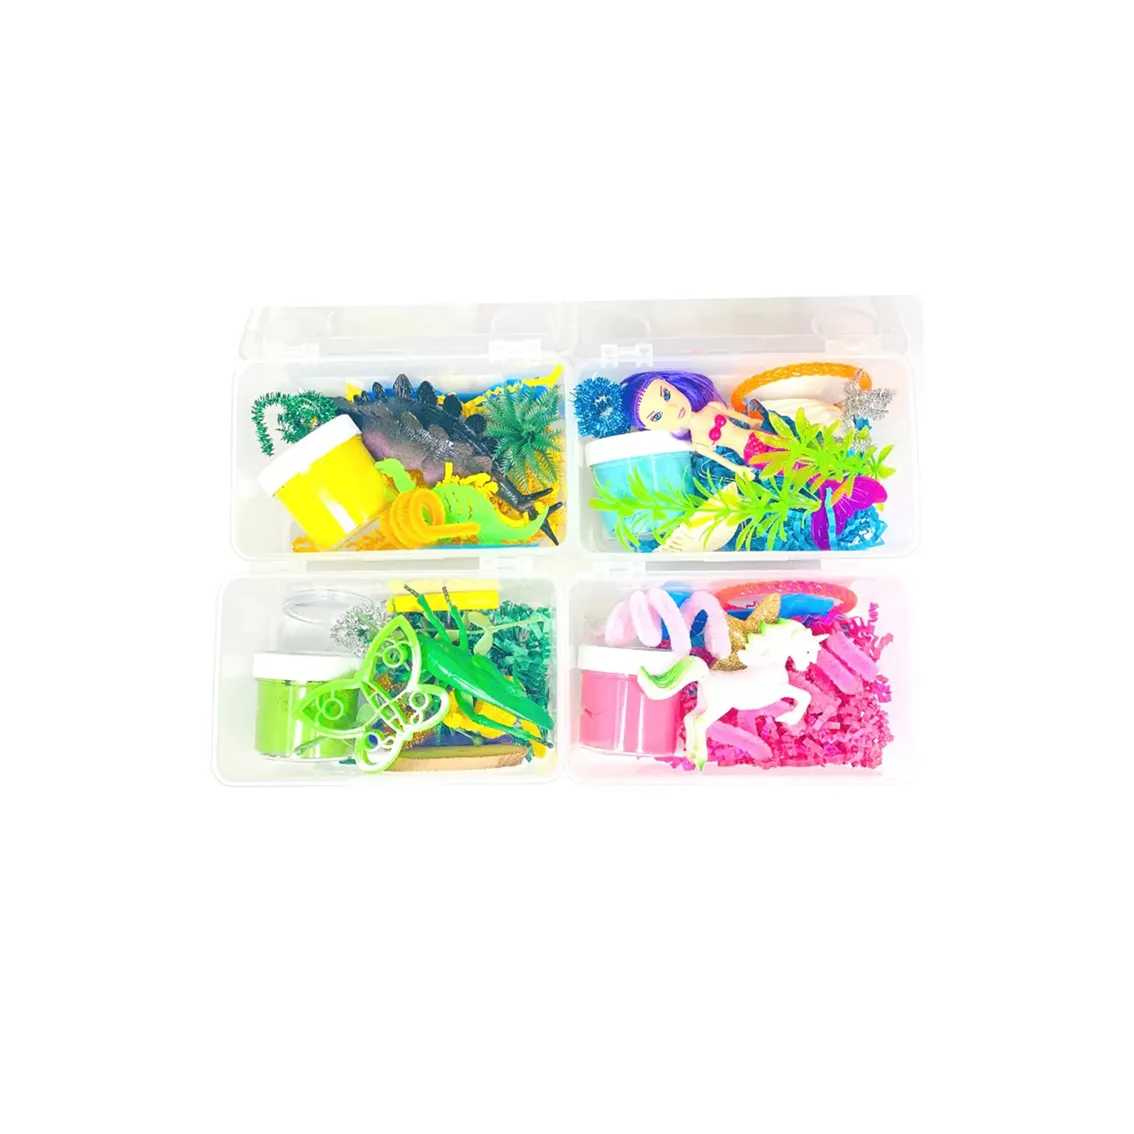 DIY Educational Toys 4 Pack Mini Kits Toddler Friendly Edition with Bugs Life, Mermaid, Dinosaur and Unicorn Play Dough for Kids